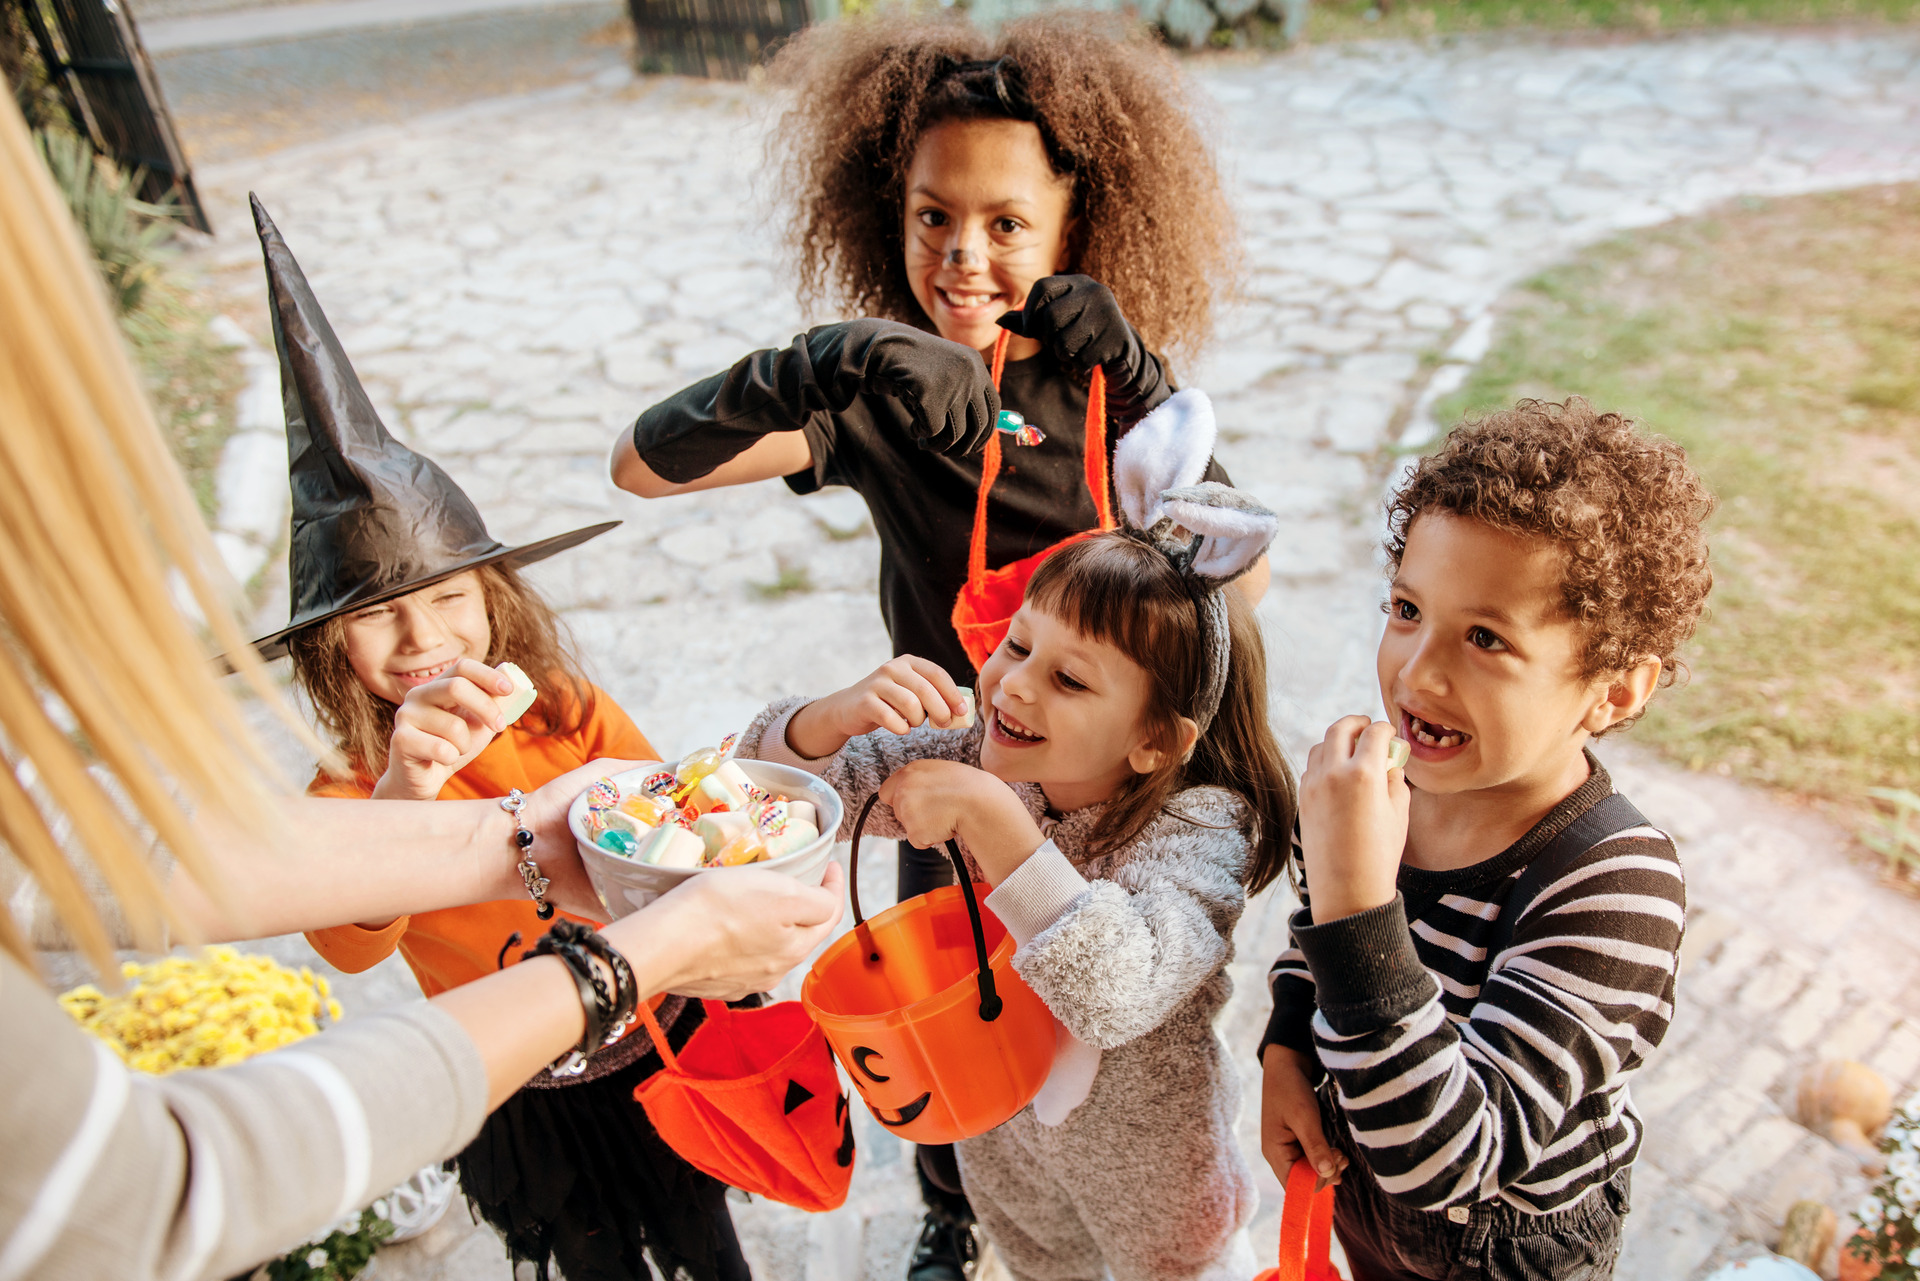 Tricks or treat! Halloween is the perfect time for candies.